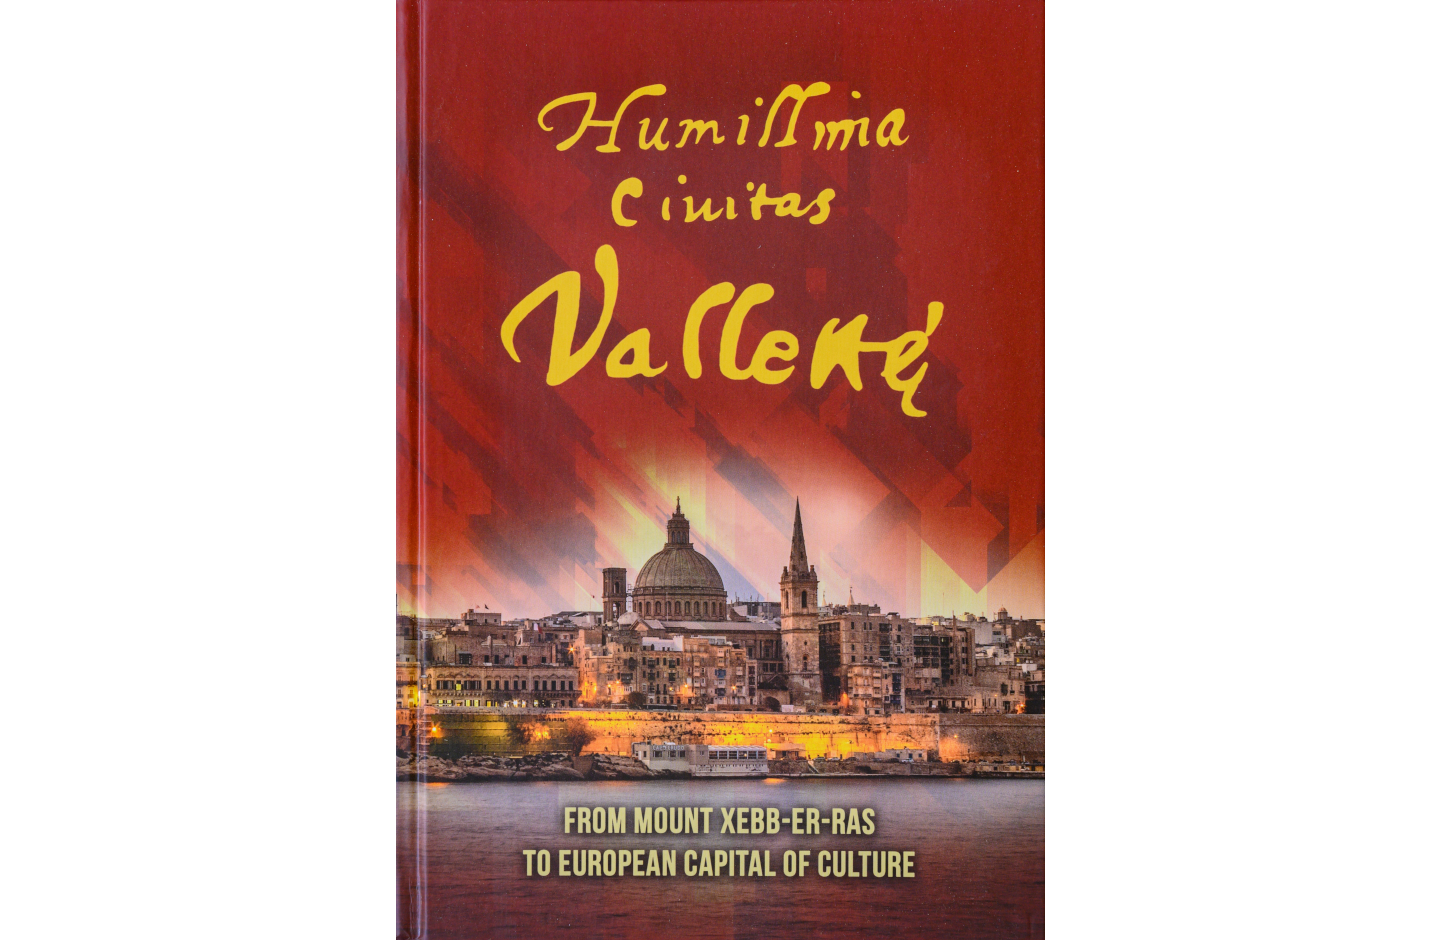 Humillima Civitas Vallettae: From Mount Xebb-er-ras to European Capital of Culture